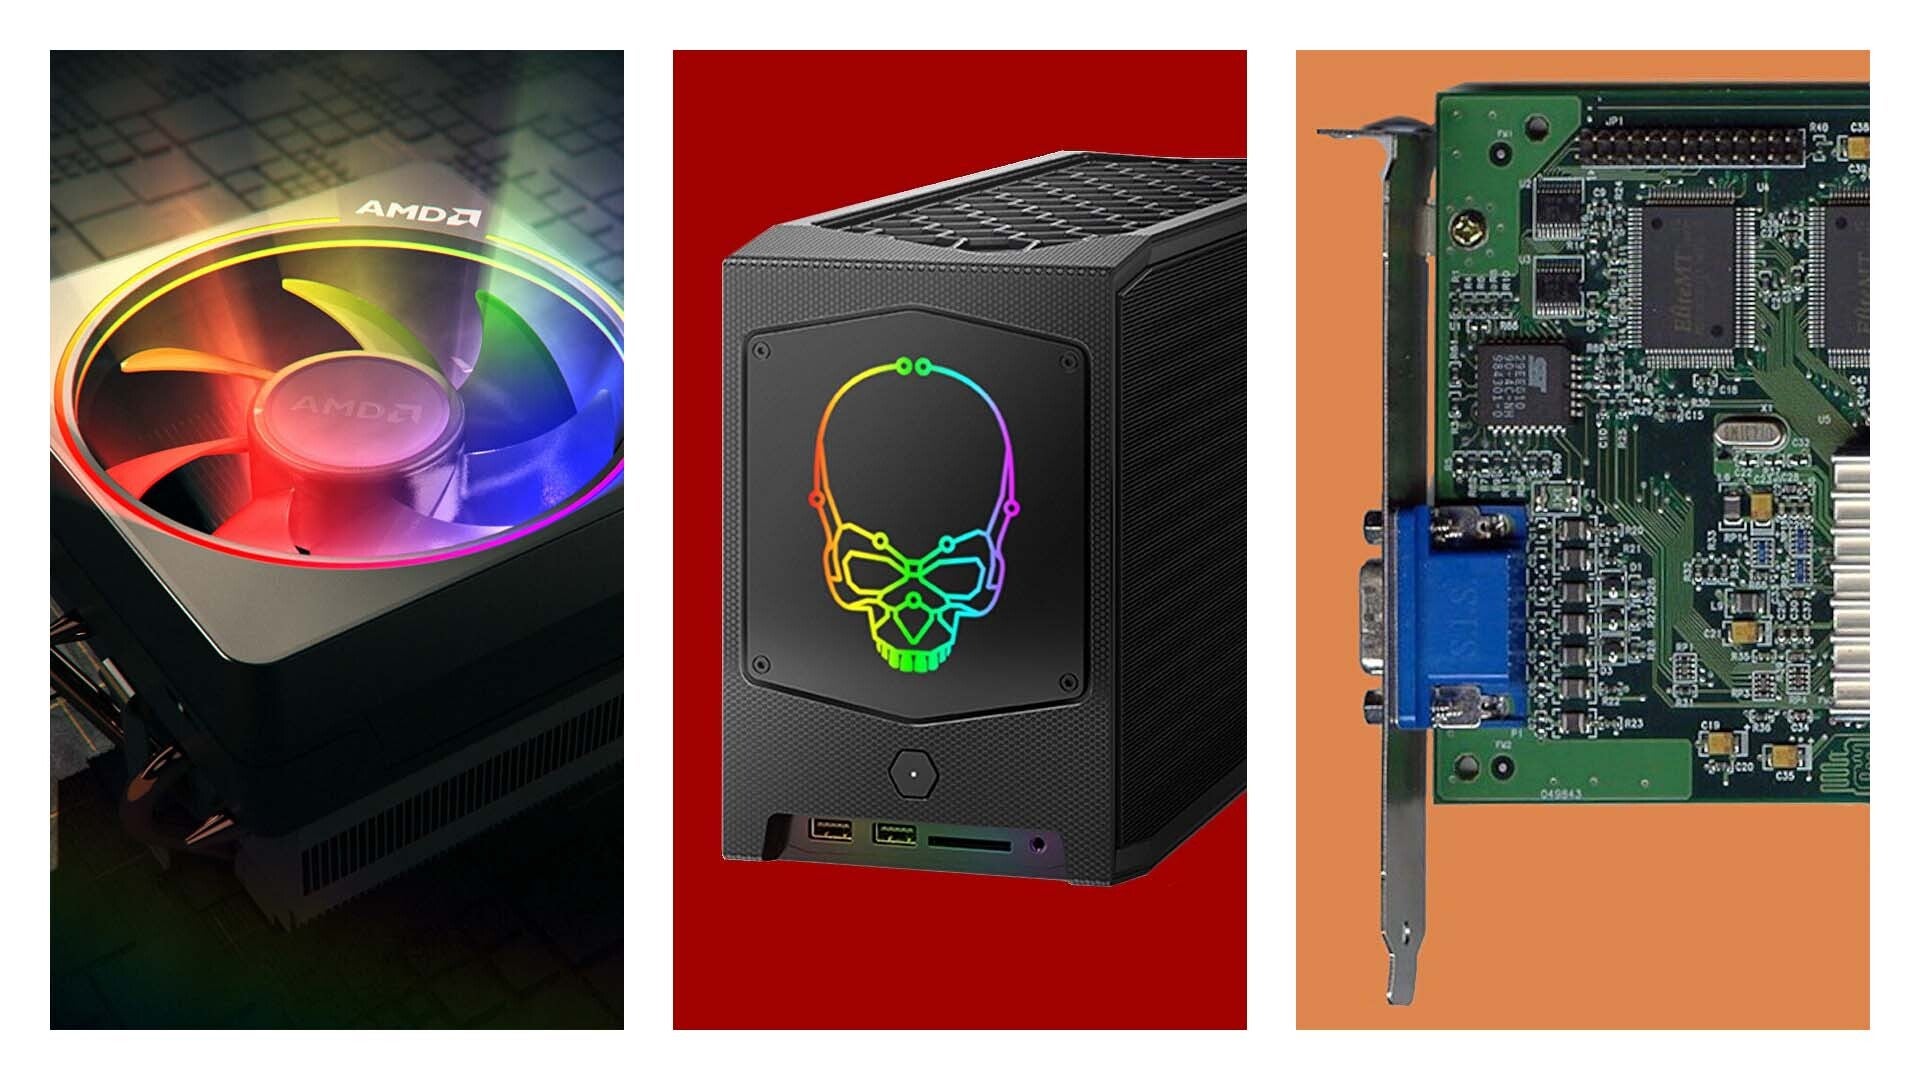 a composite image of, left to right, a PC fan, a PC tower with a rainbow skull light on it, and a graphics card